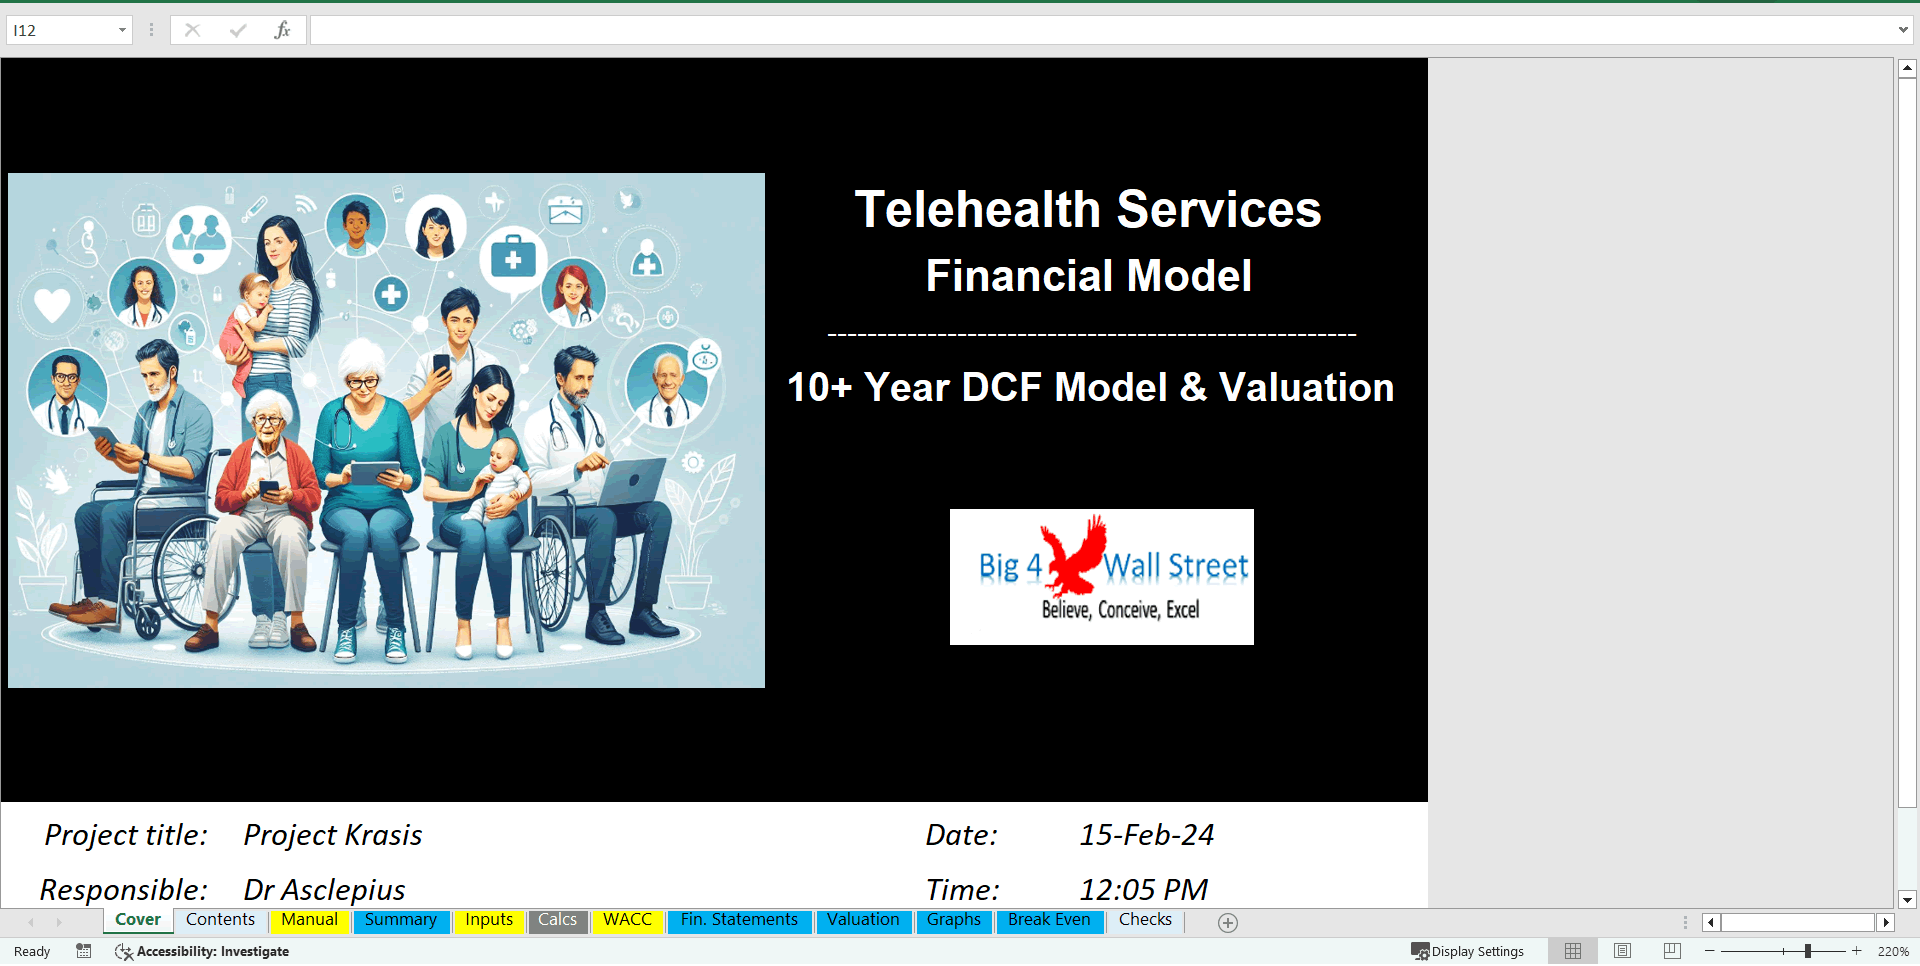 Telehealth Services Company Financial Model (10+ Year DCF and Valuation)